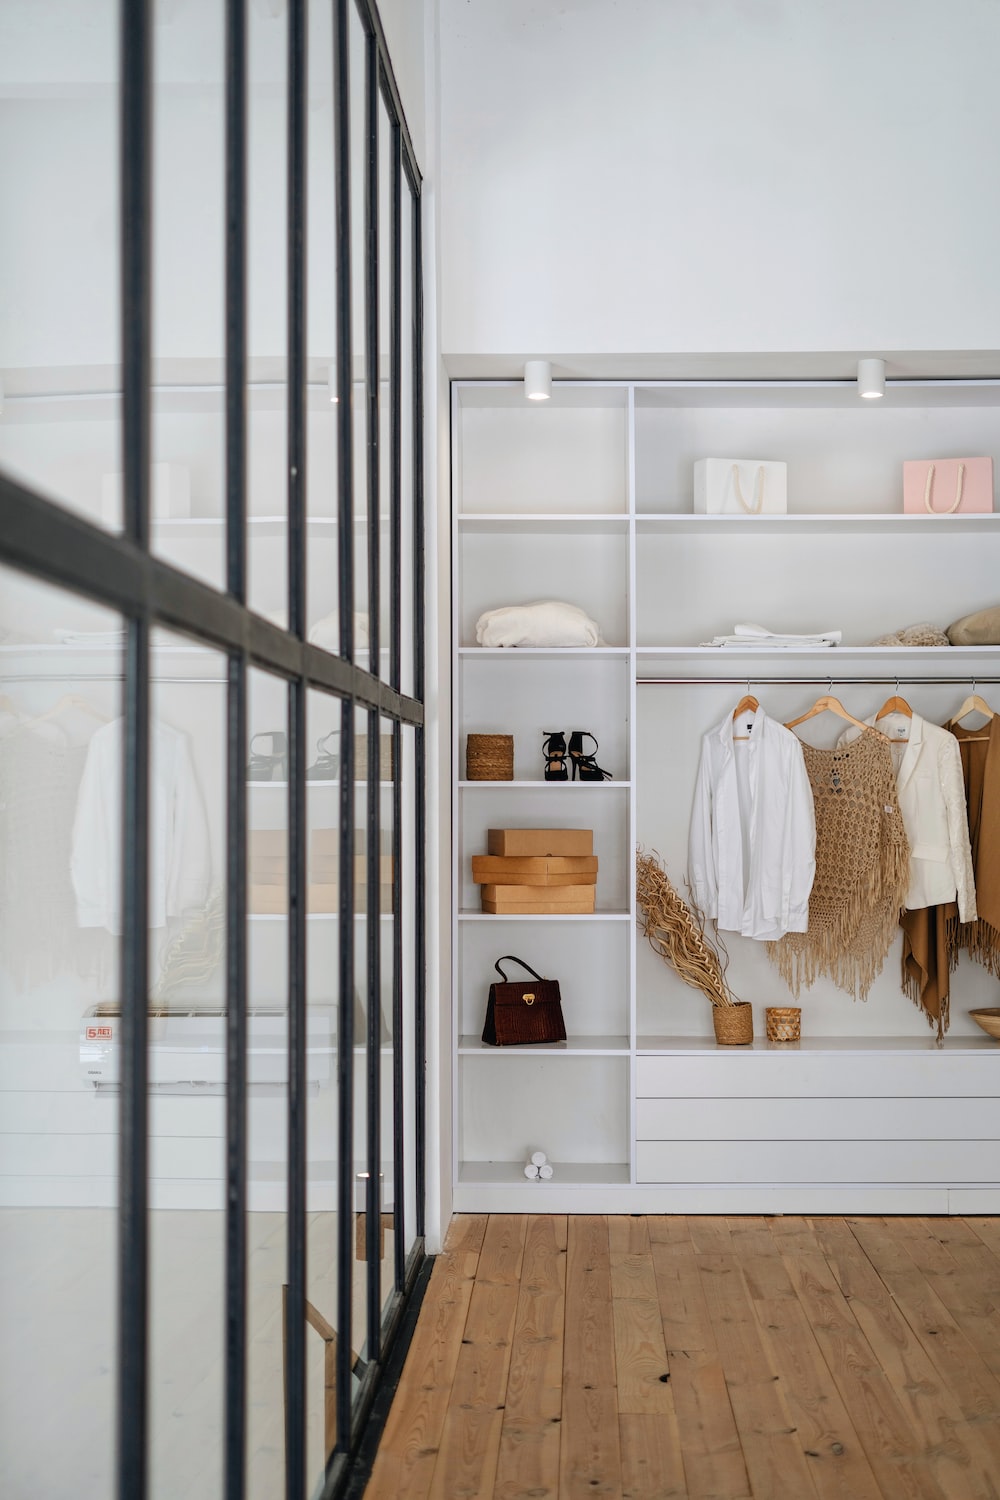 What are modular wardrobes?